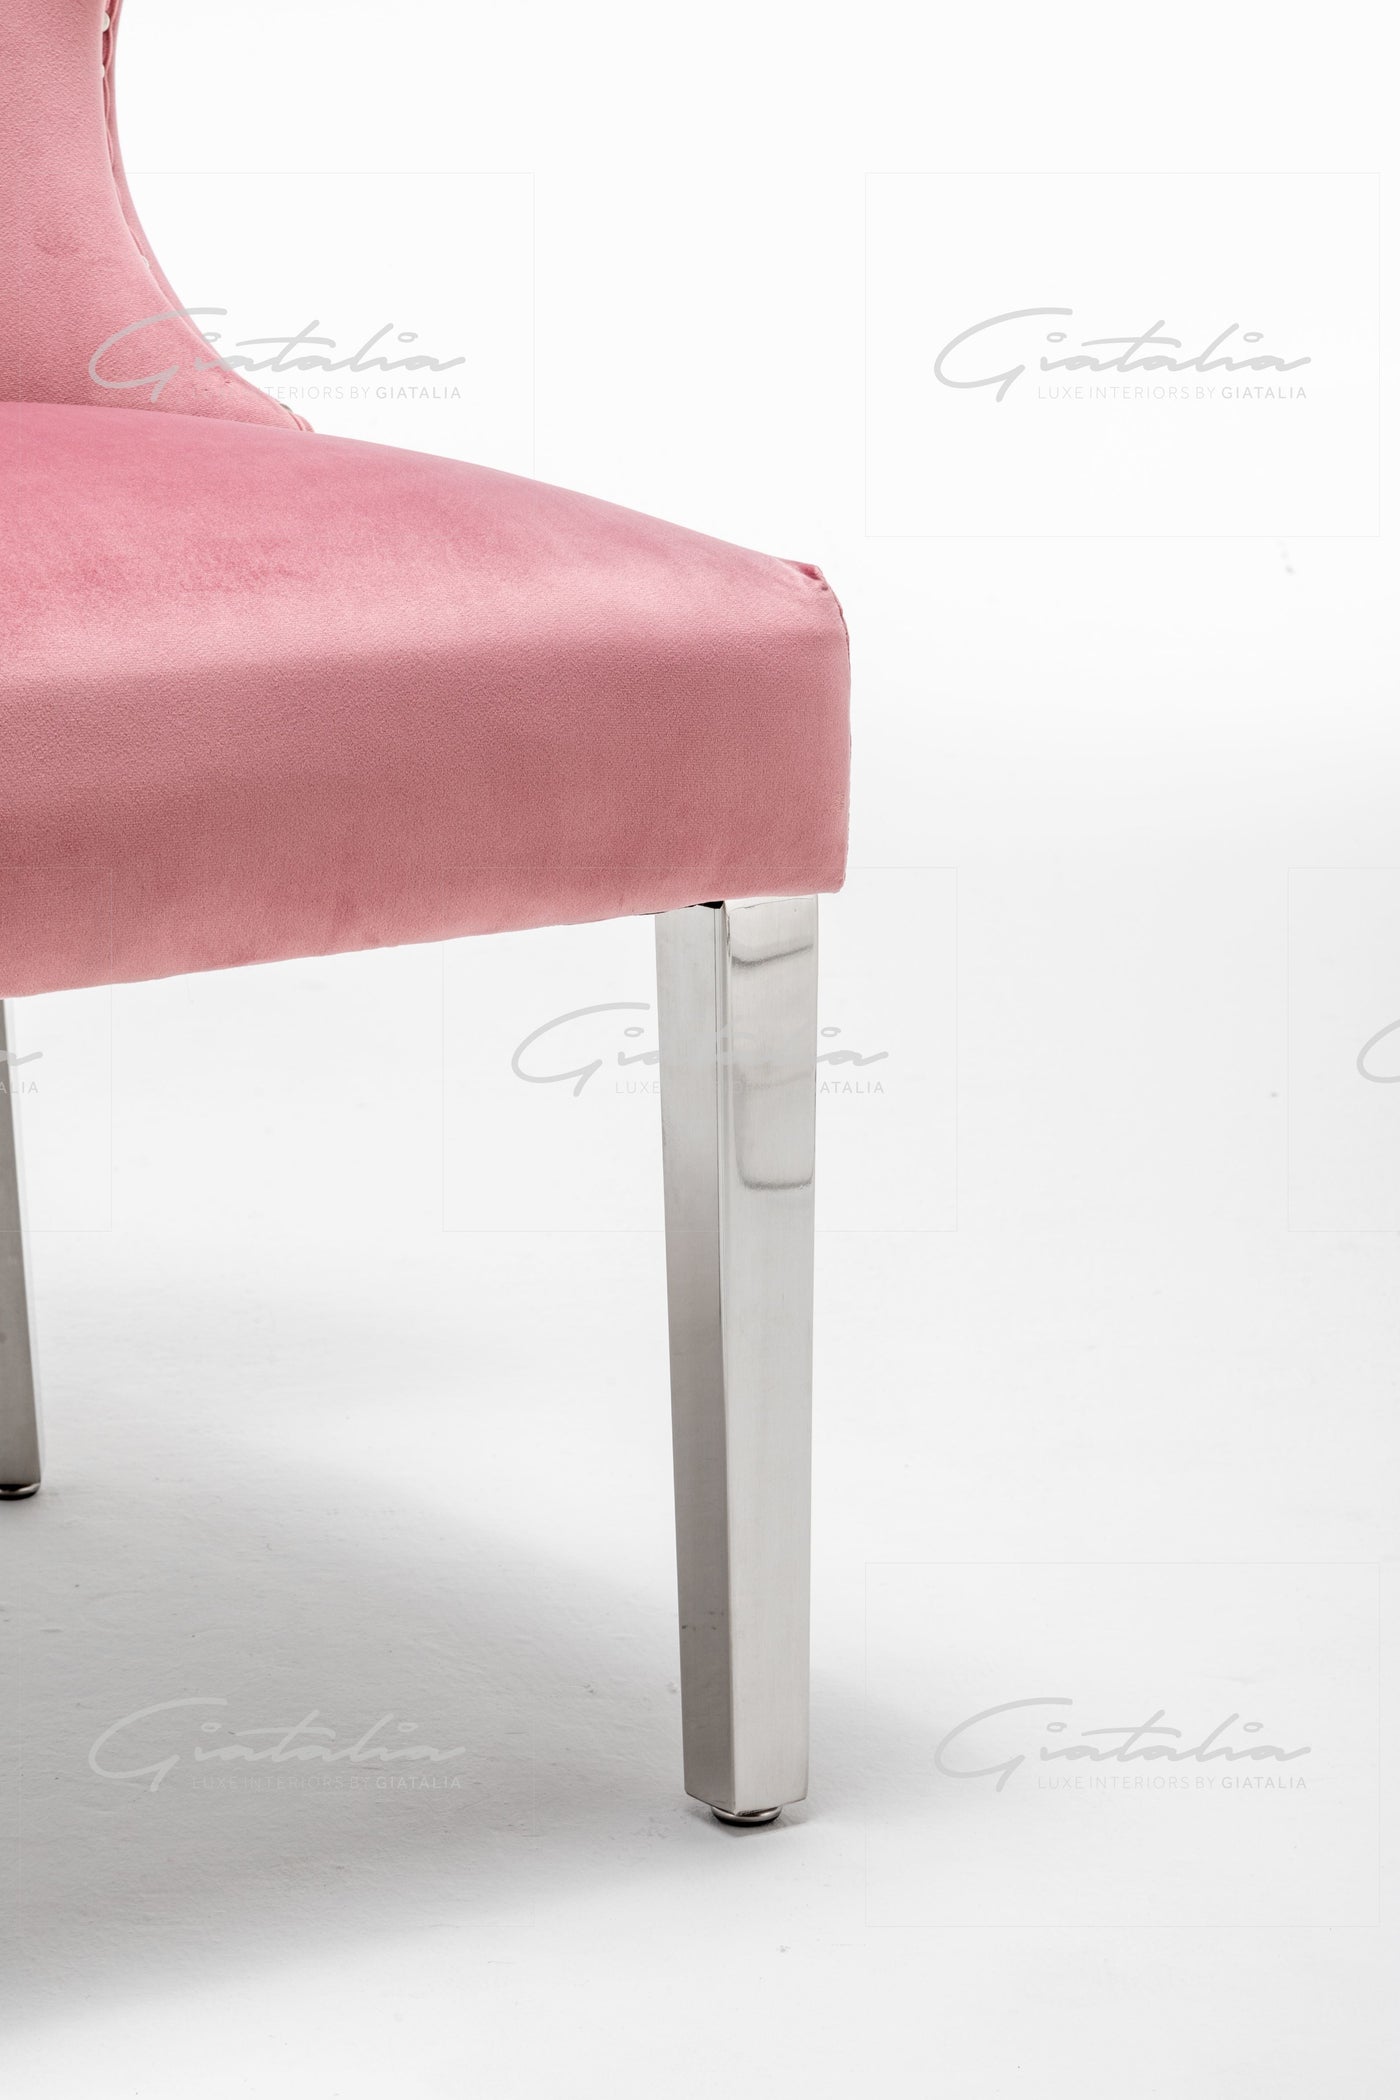 Florence Blush Pink French Plush Velvet Button Back Dining Chair With Chrome Legs-Esme Furnishings